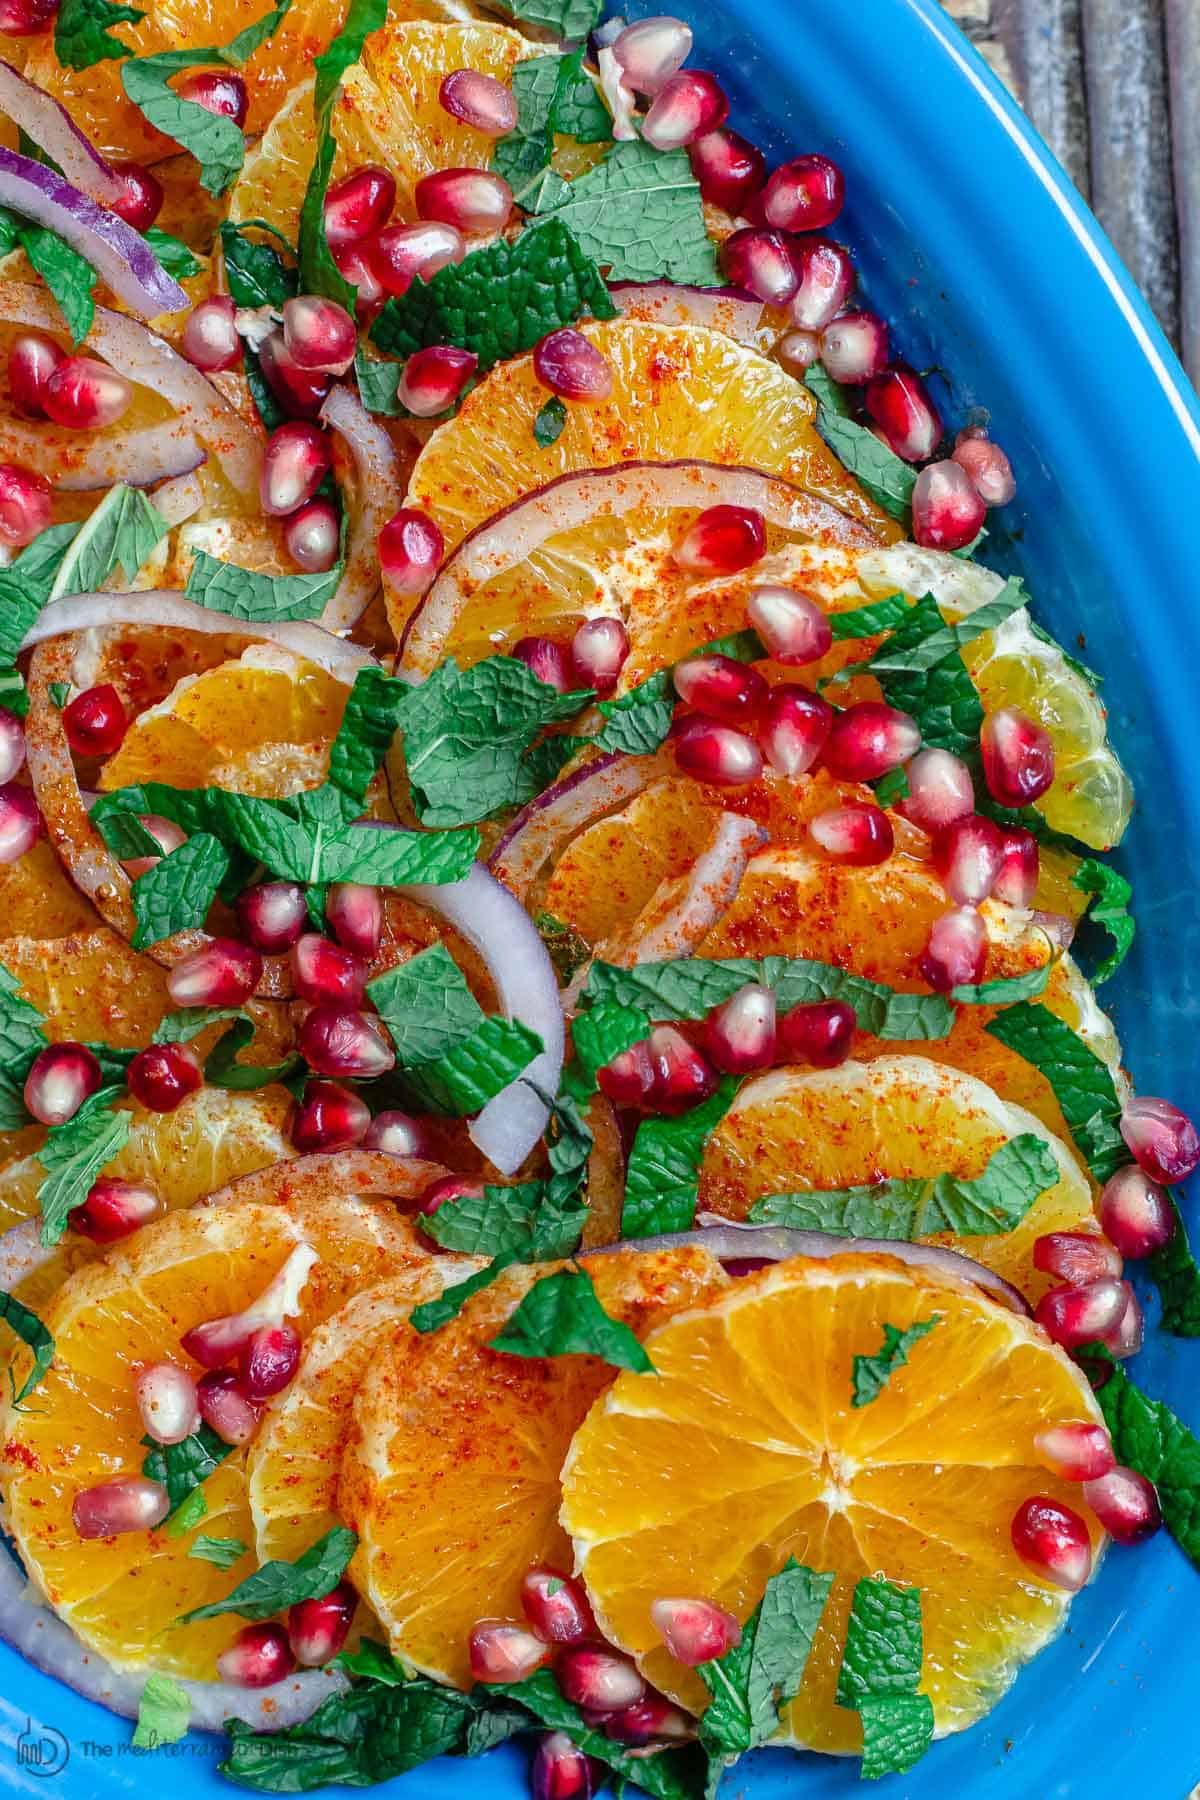 Orange Salad arranged on platter with pomegranate seeds, fresh mint, and onions